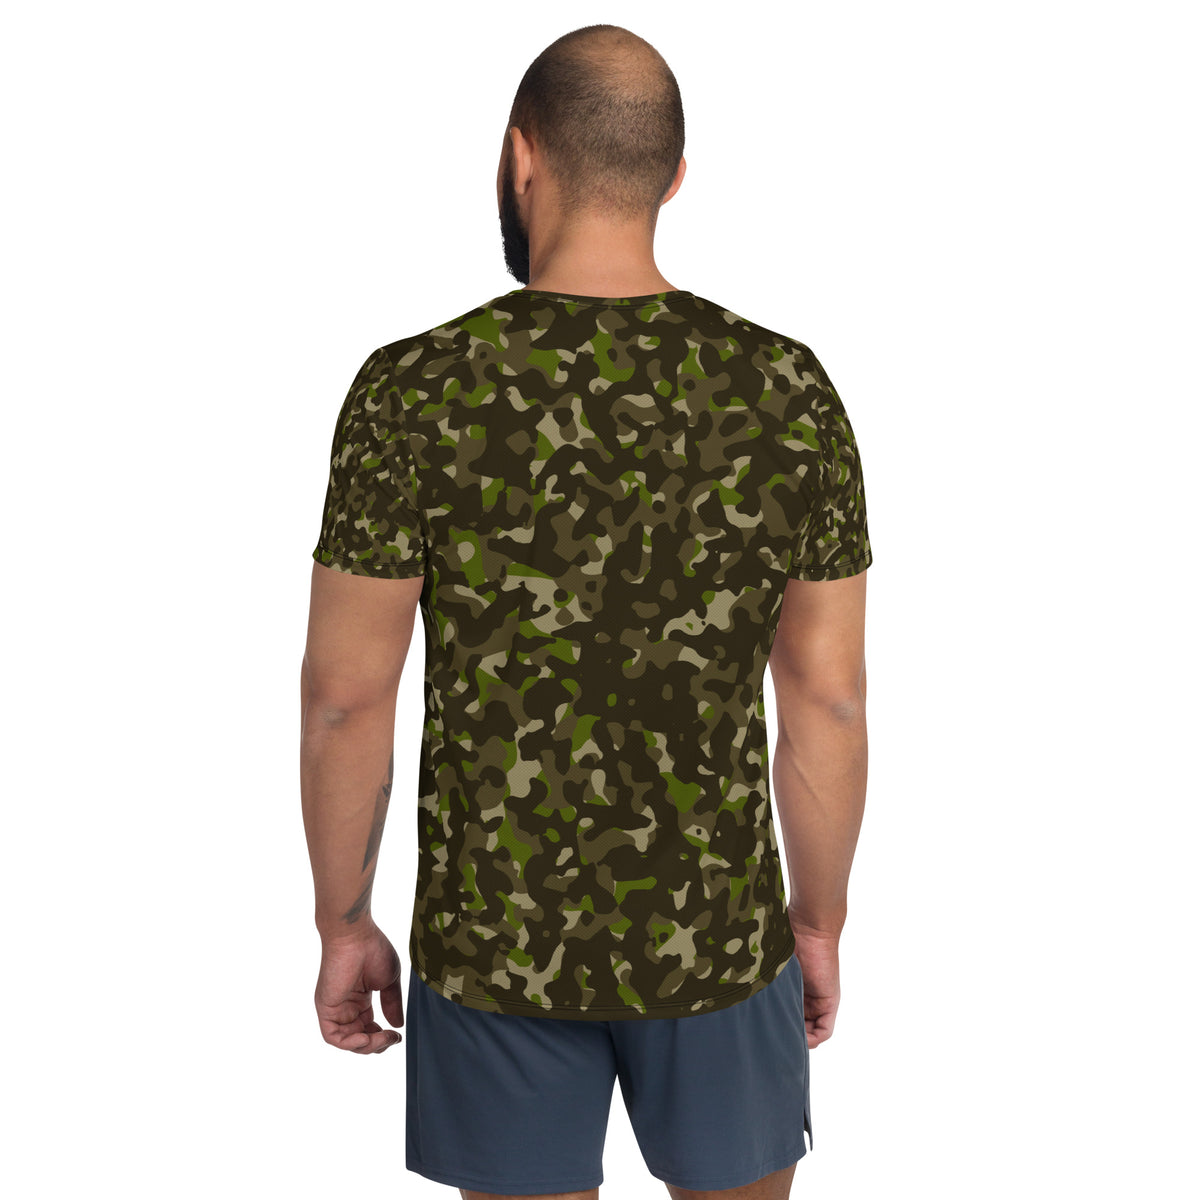 Outer Limit Supply Men's Camo Athletic T-shirt - Orange Traditional